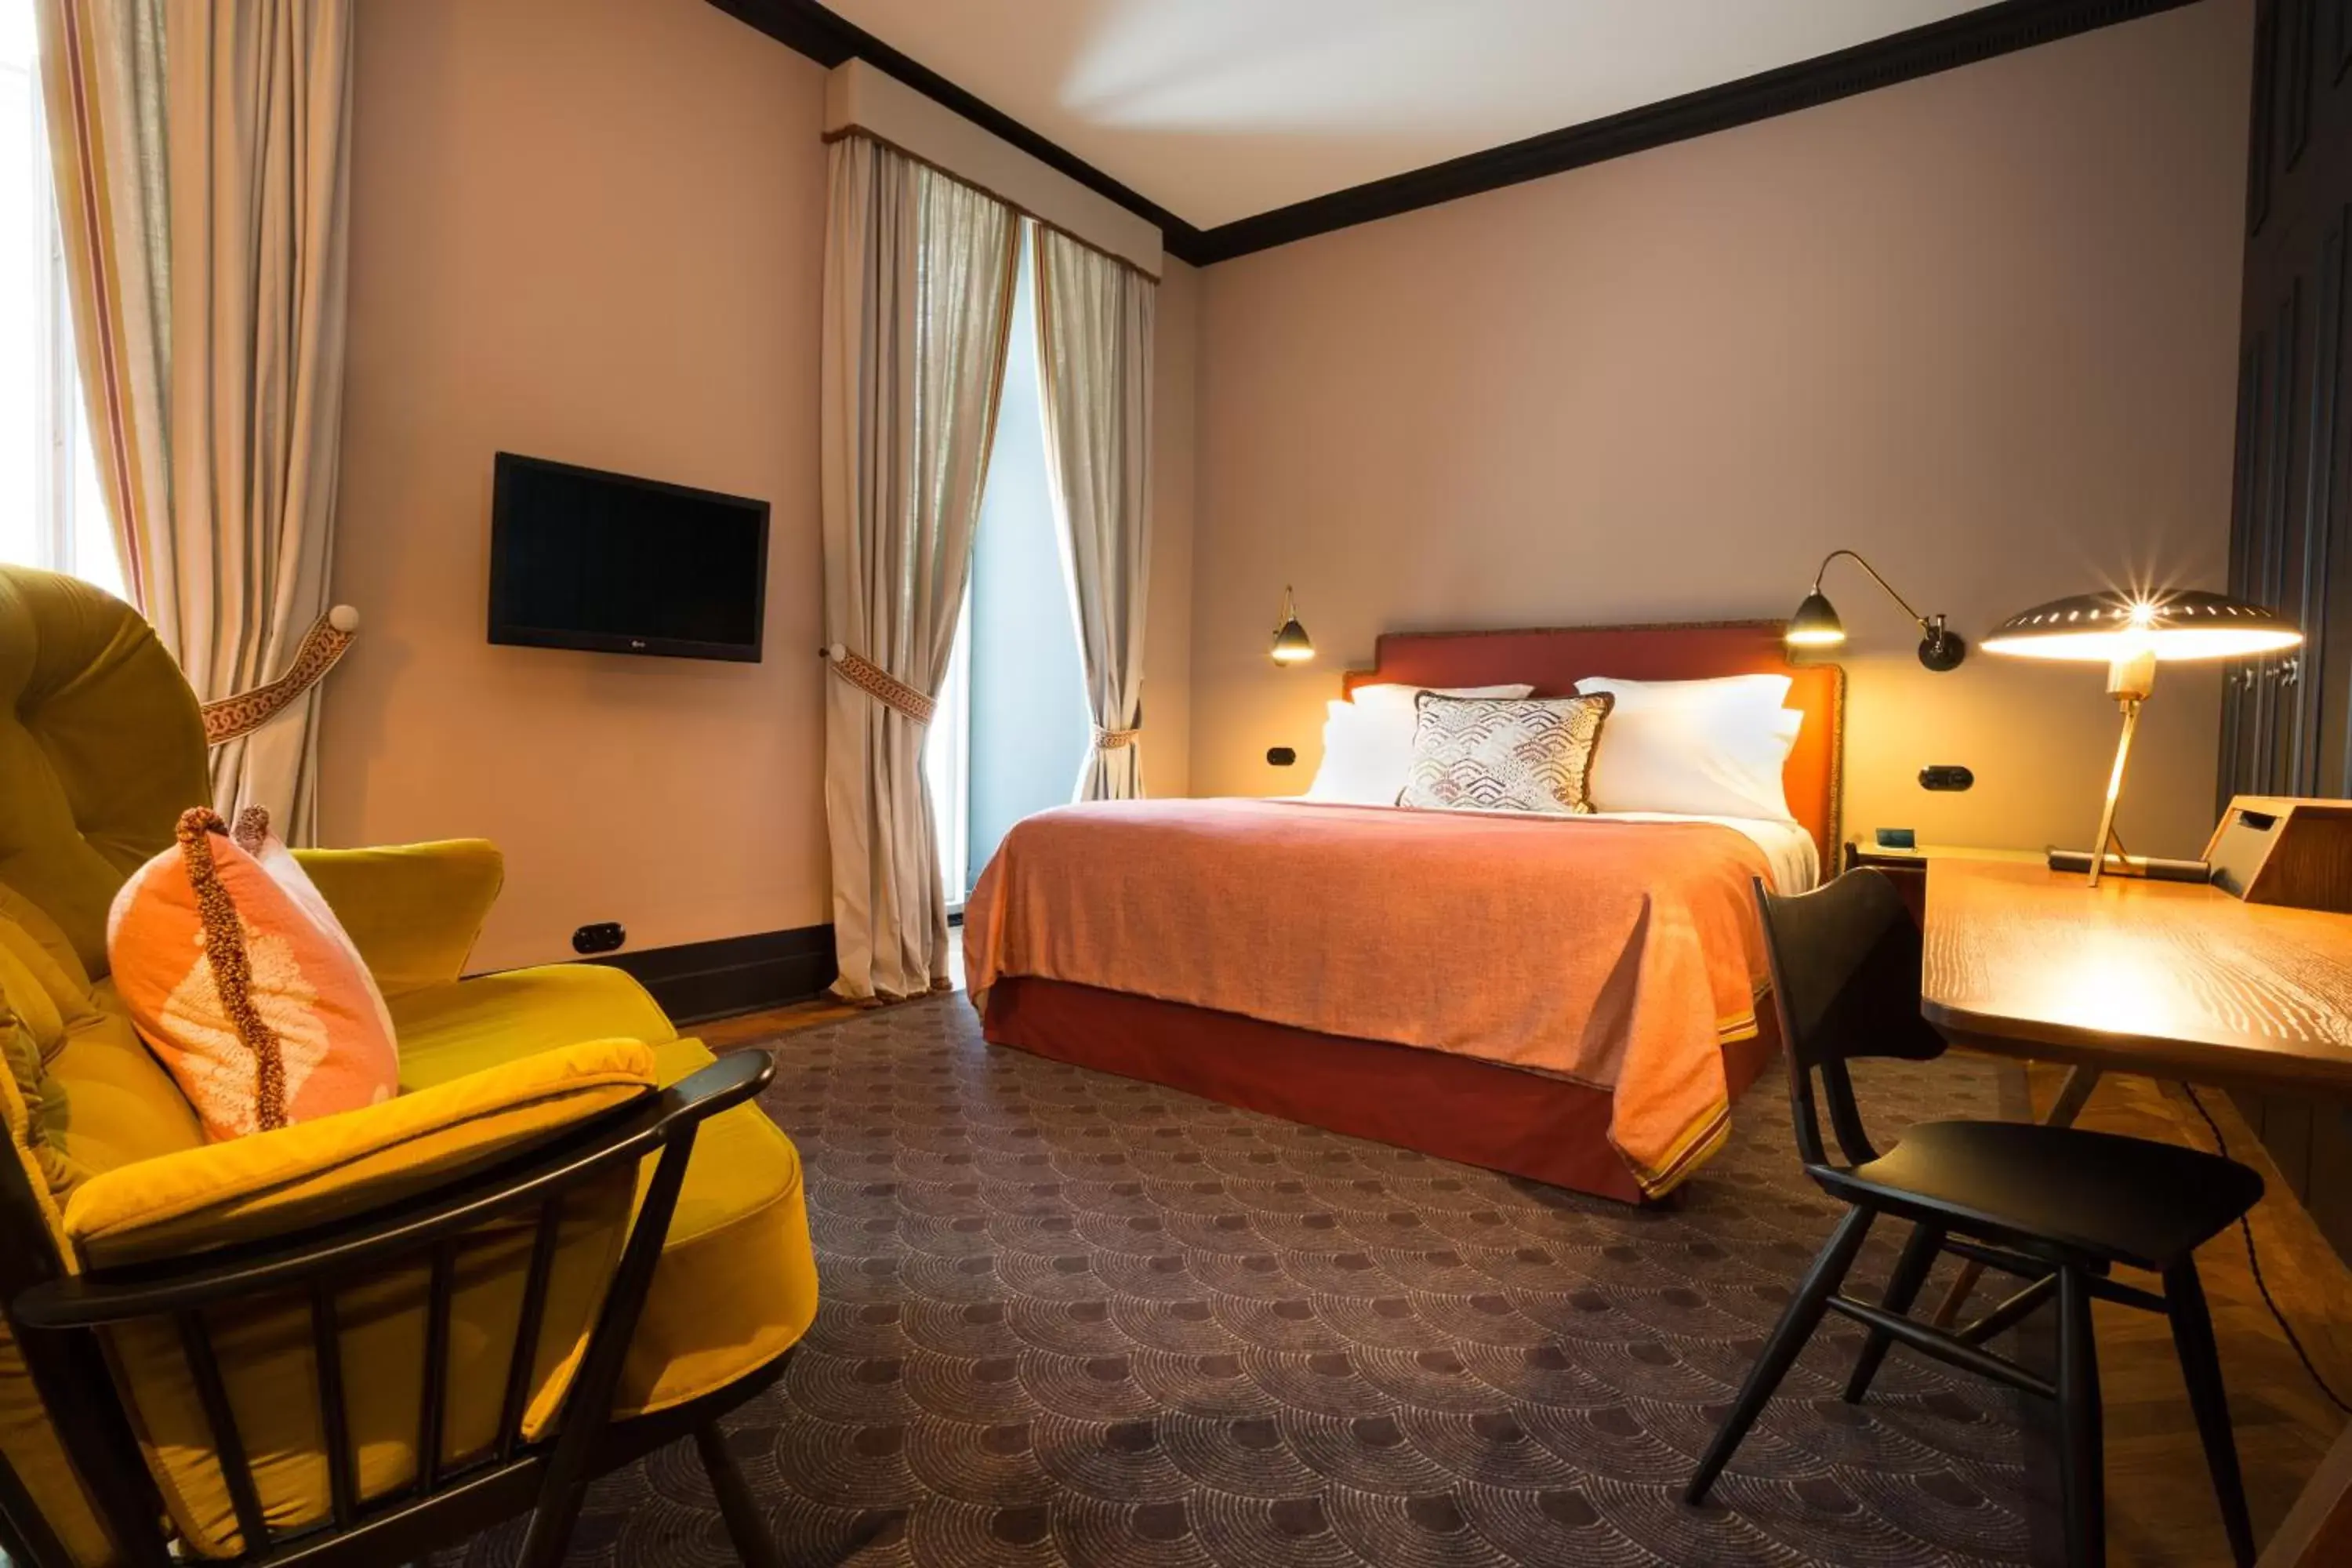 Deluxe Double Room in Hotel Valverde Lisboa - Relais & Chateaux